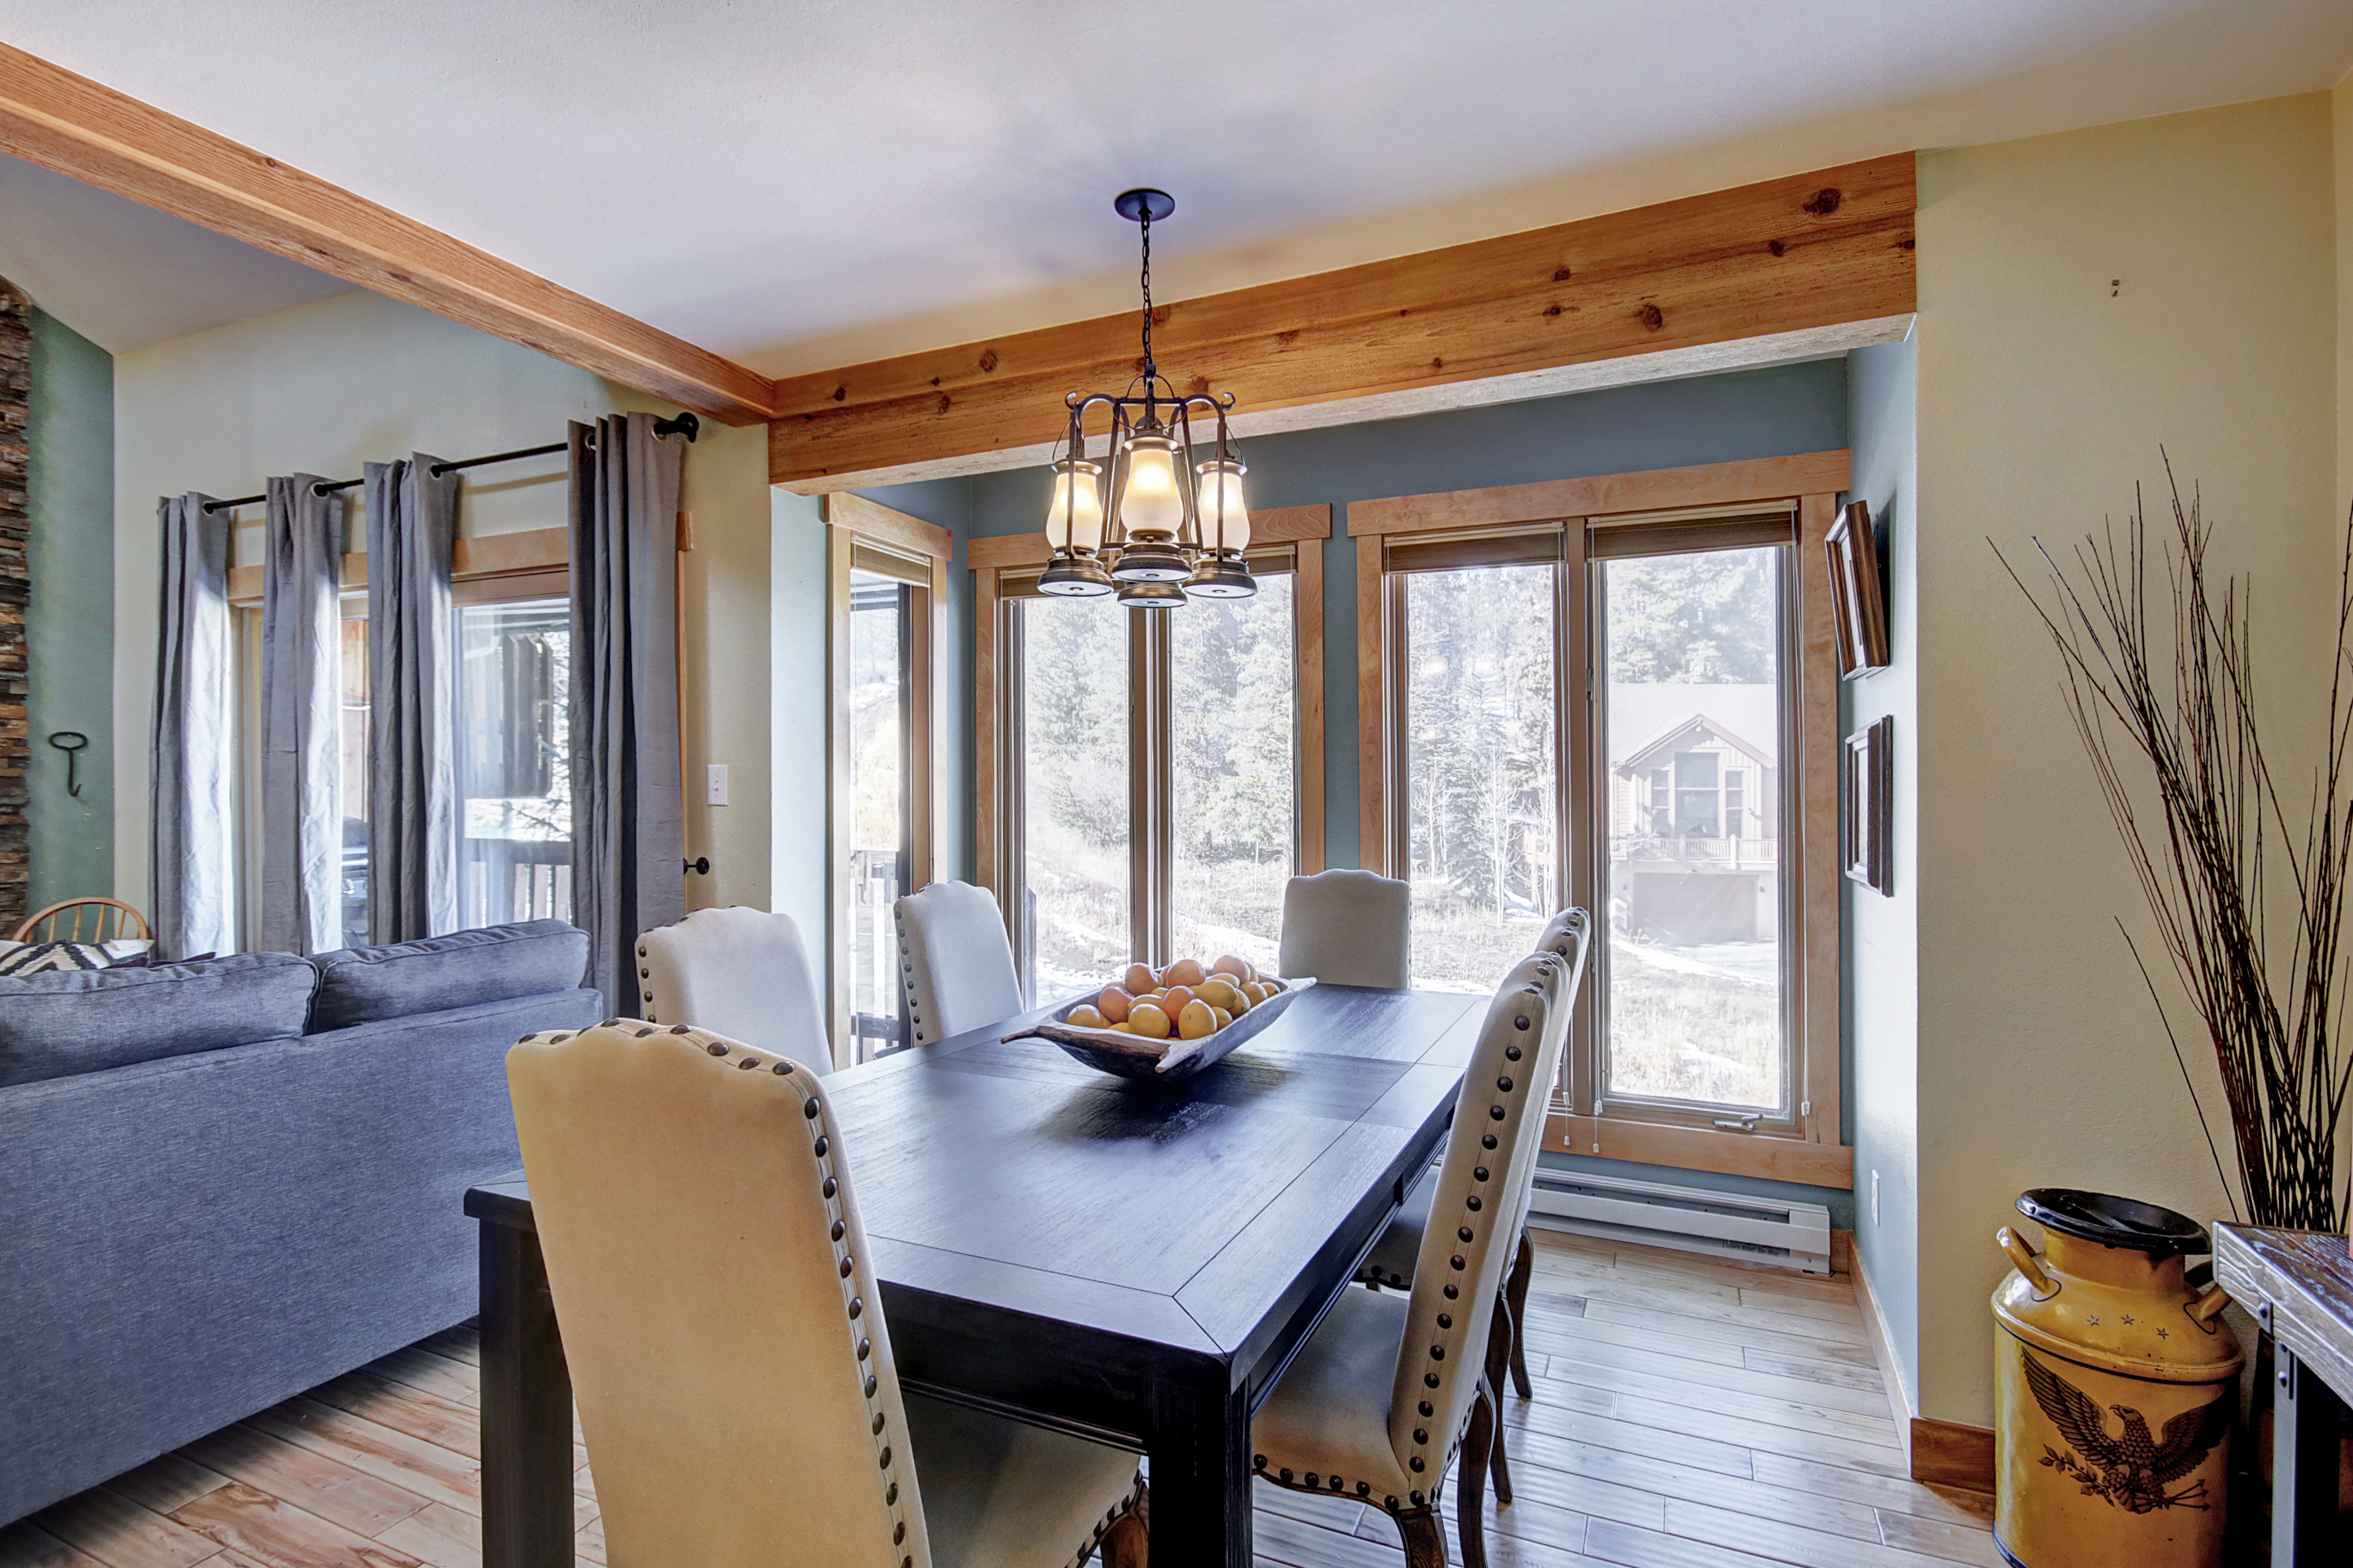 Seating for 2 at the kitchen bar - 4 O’Clock Lodge D26 Breckenridge Vacation Rental